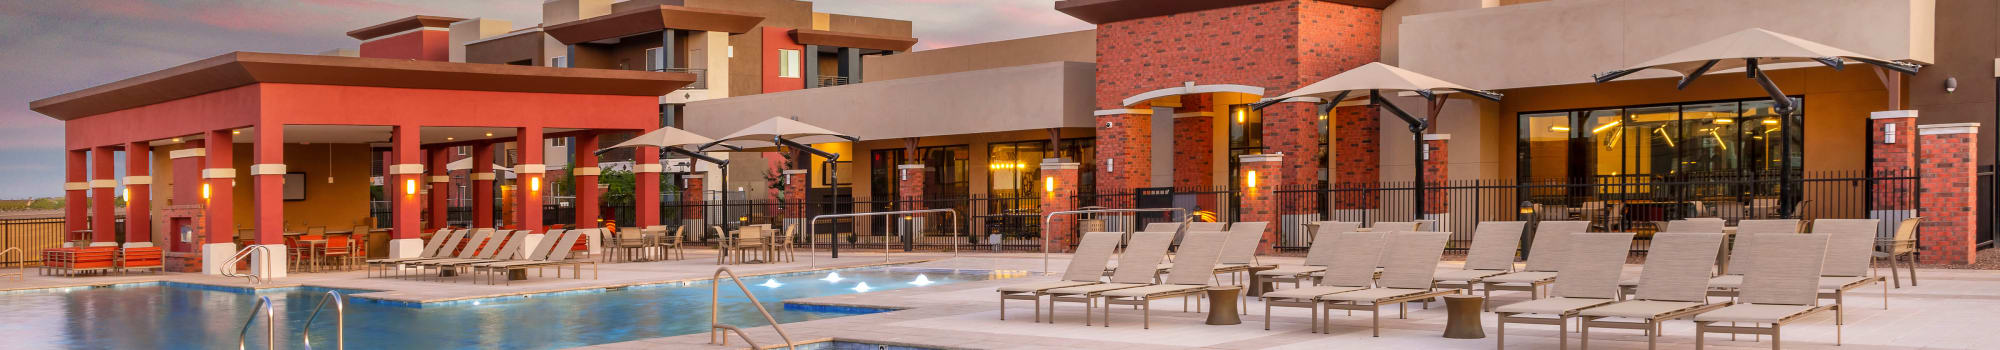 Amenities at The Crossing at Cooley Station in Gilbert, Arizona